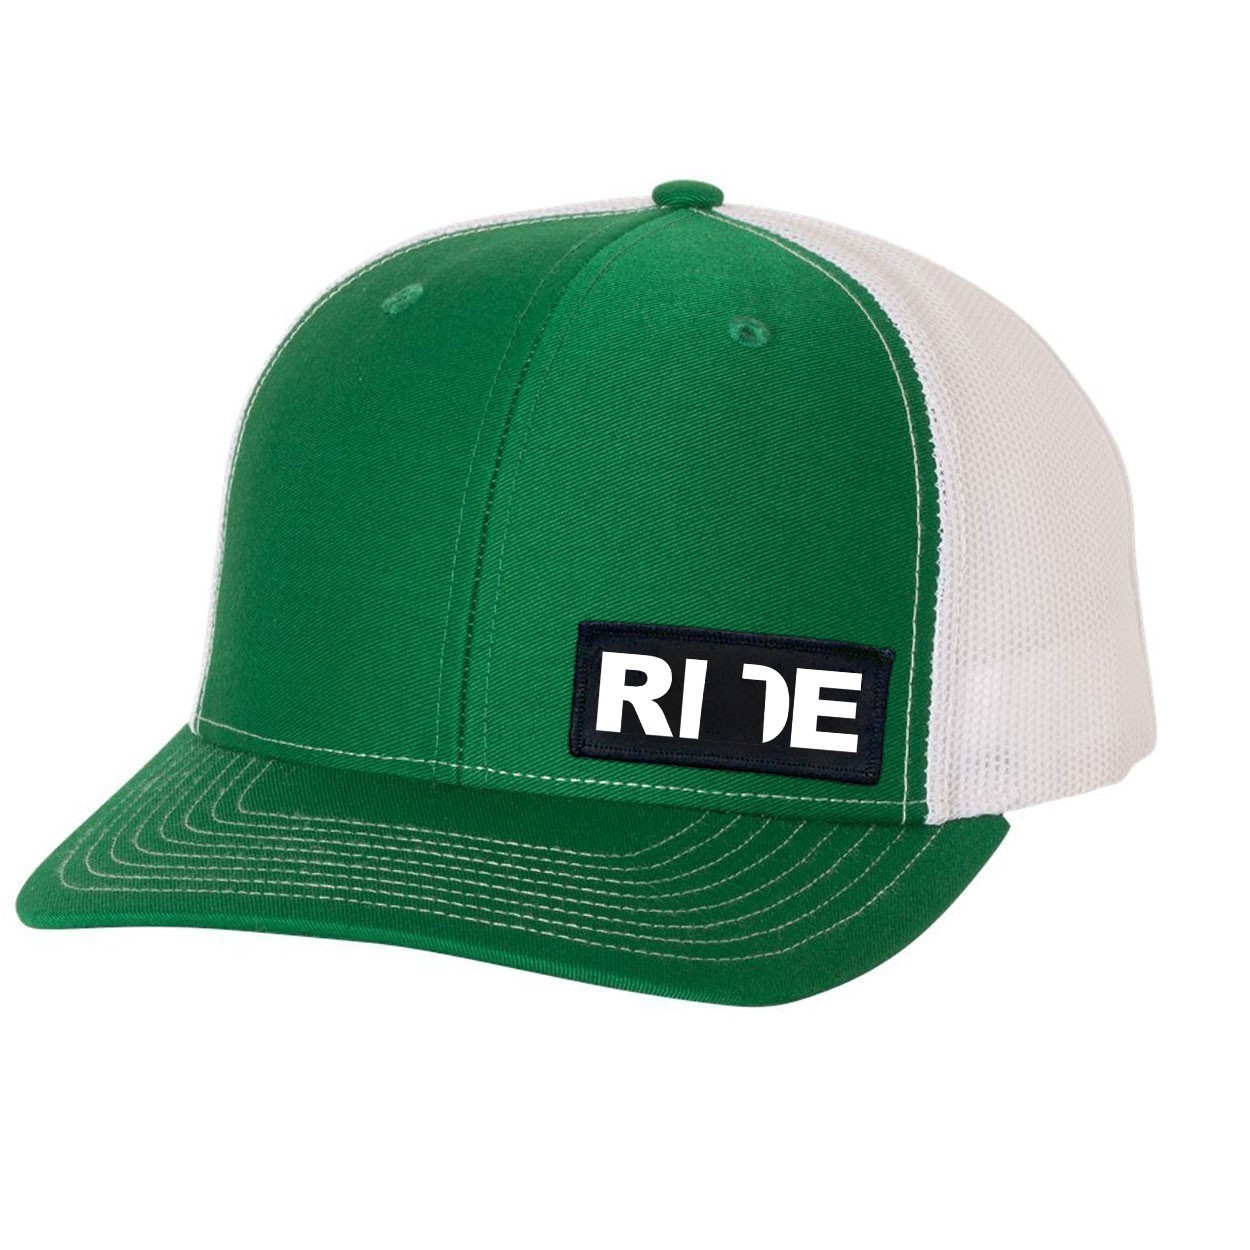 Ride Utah Night Out Woven Patch Snapback Trucker Hat Green/White (White Logo)